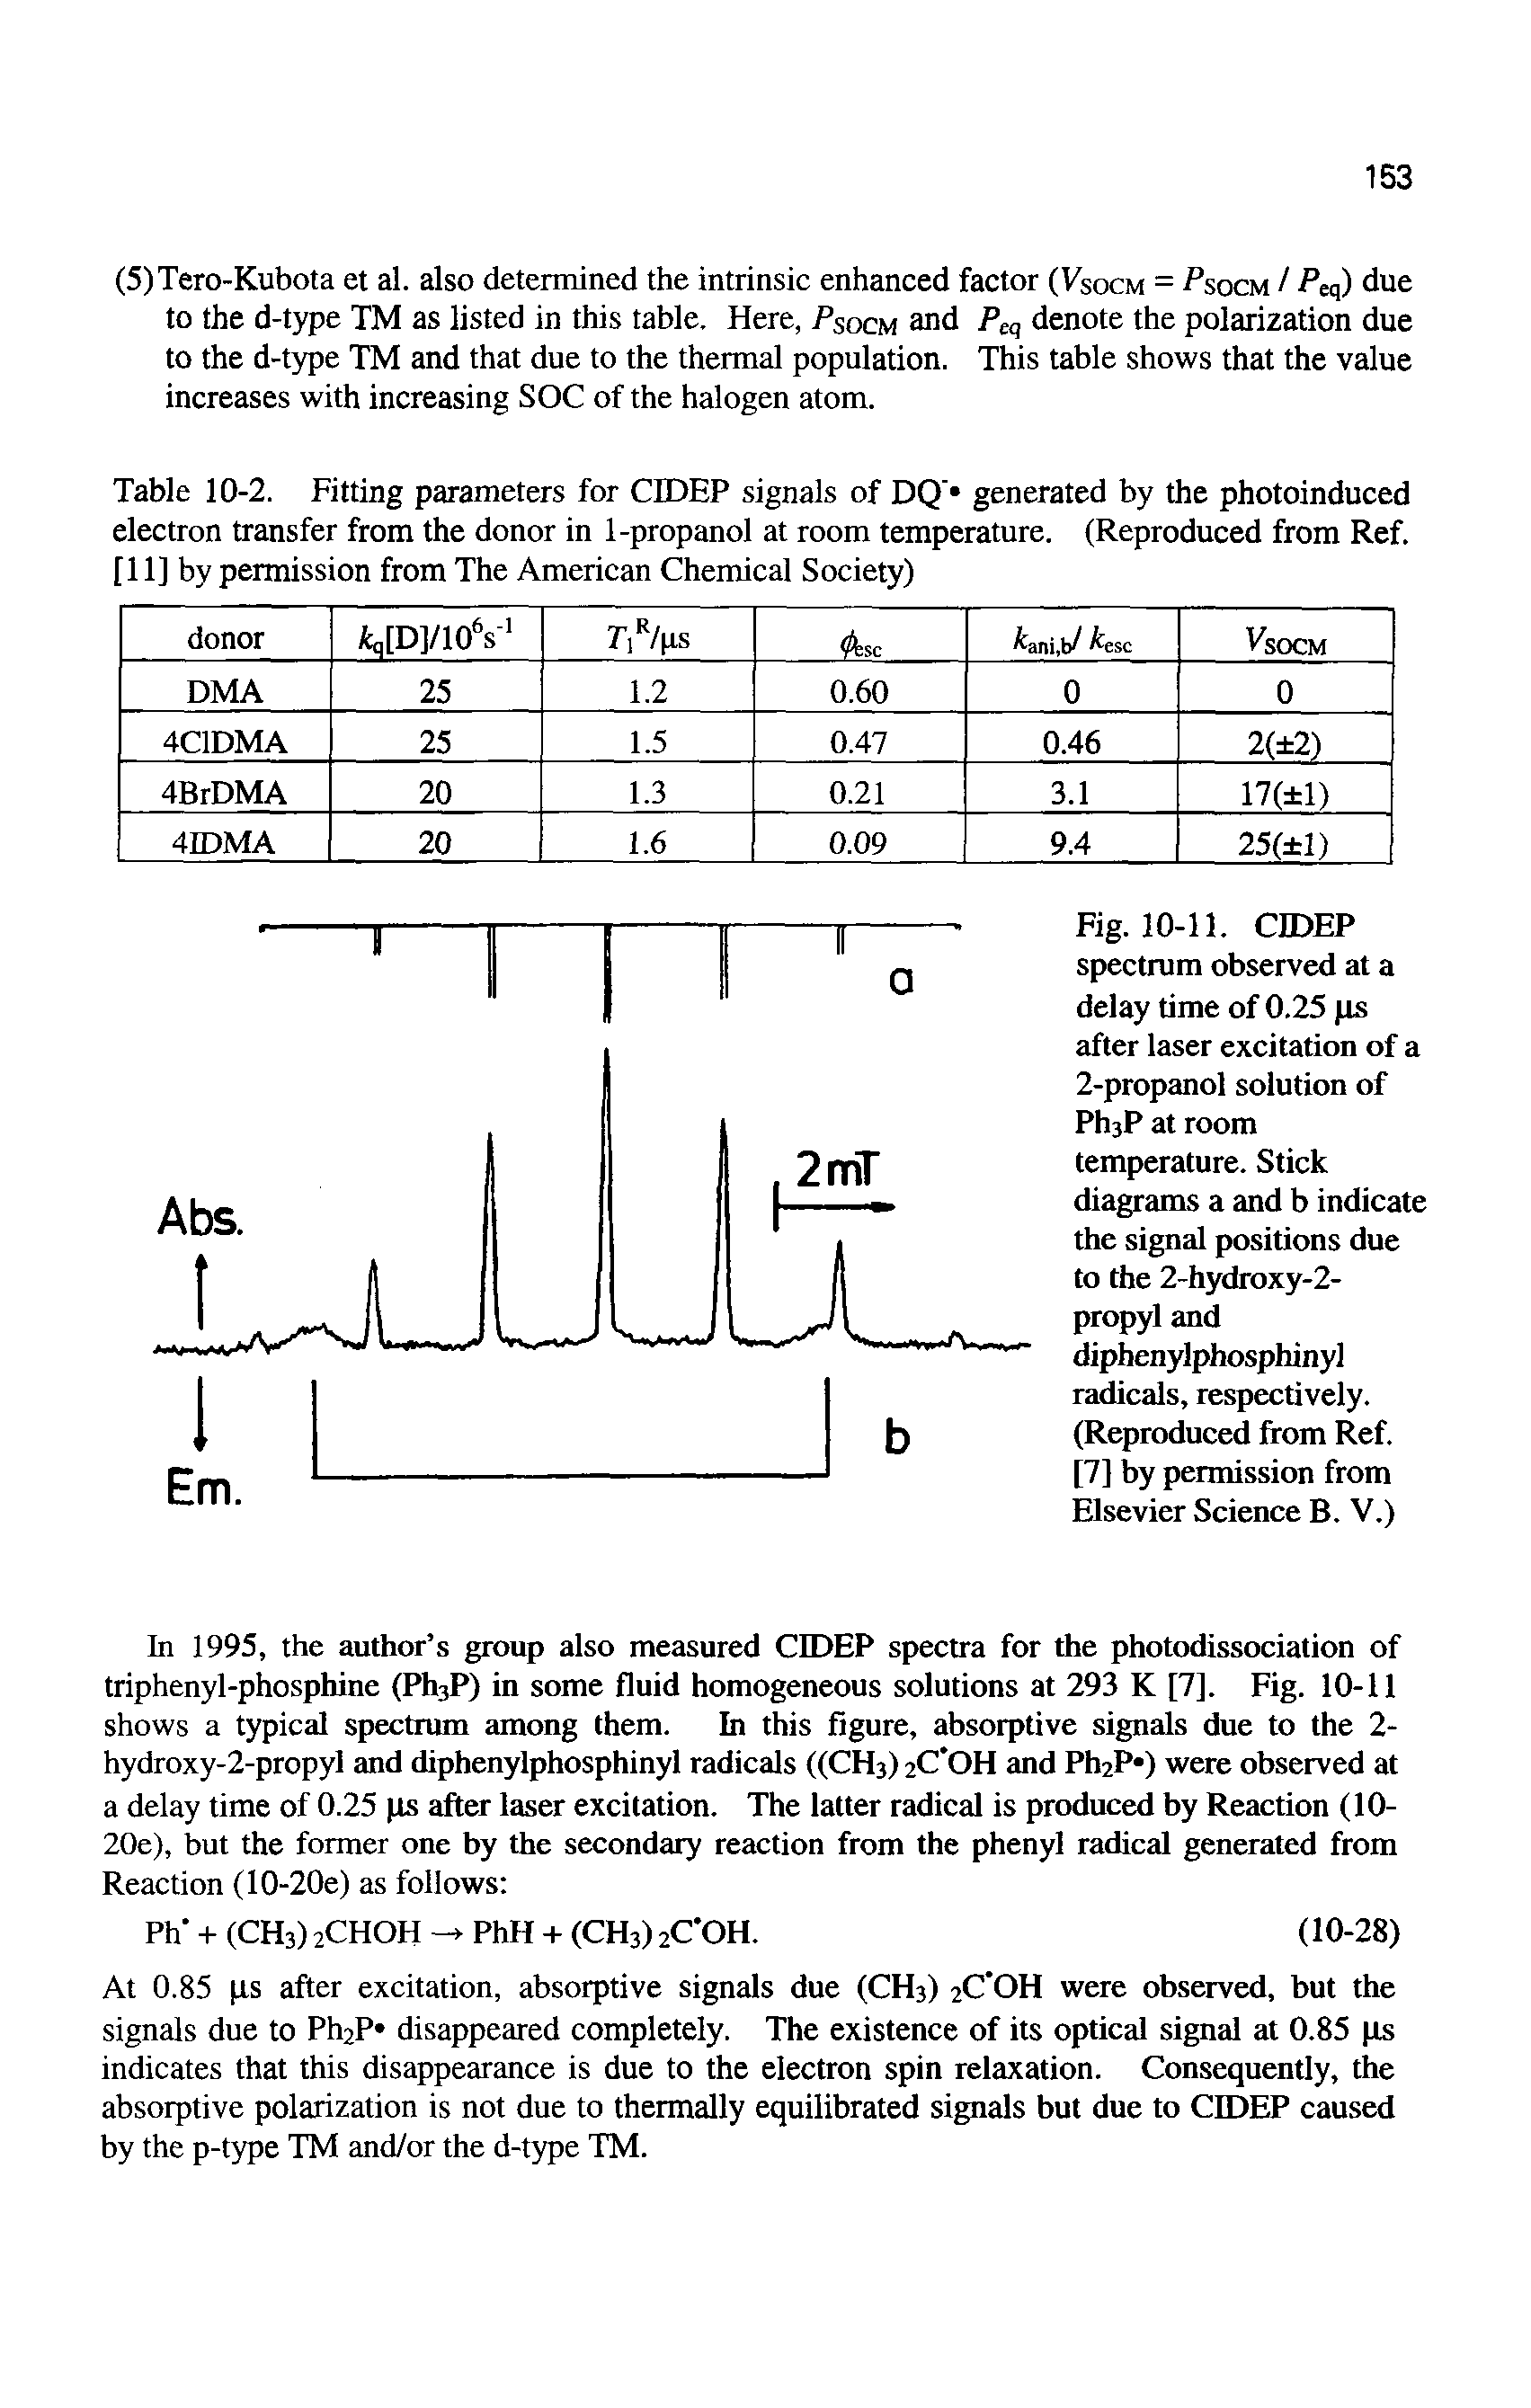 Fig. 10-11. CIDEP spectrum observed at a delay time of 0.25 ps after laser excitation of a 2-propanol solution of PhsP at room temperature. Stick diagrams a and b indicate the signal positions due to the 2-hydroxy-2-propyl and diphenylphosphinyl radicals, respectively. (Reproduced from Ref. [7] by permission from Elsevier Science B. V.)...